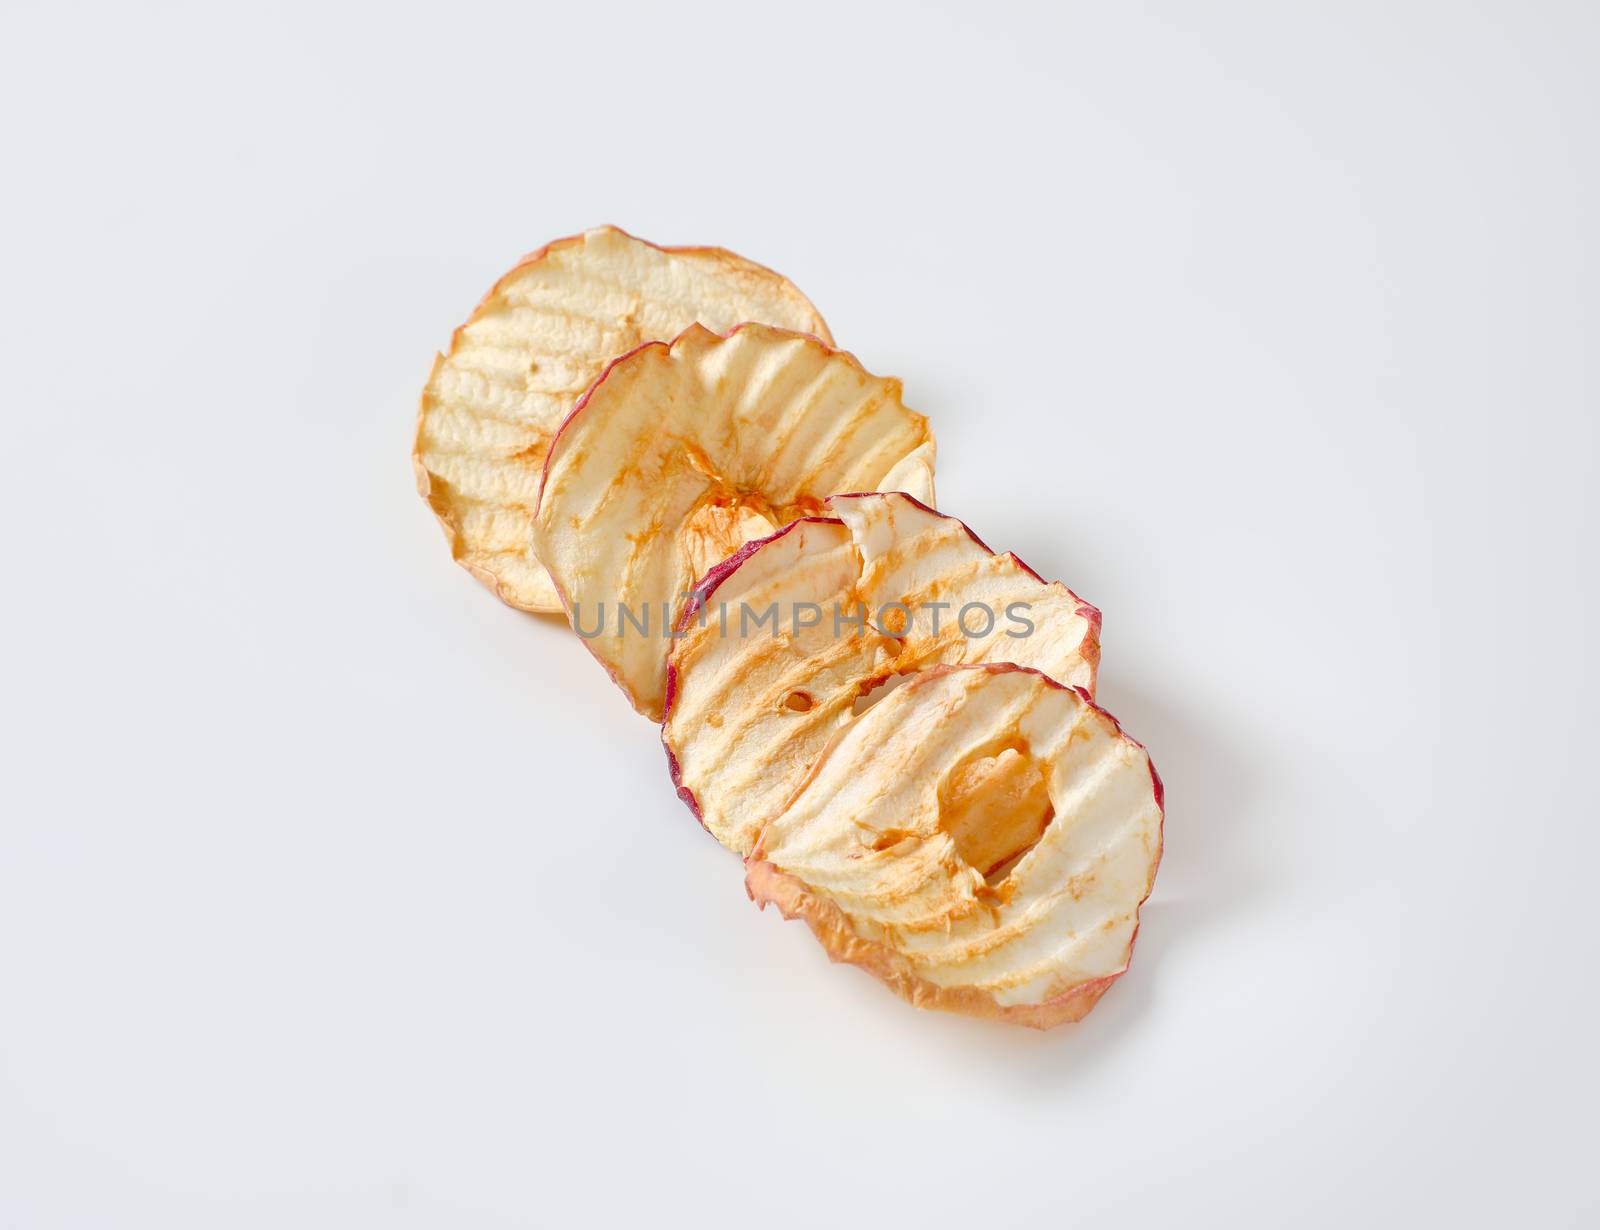 Dried apple slices (apple chips or rings) in a row